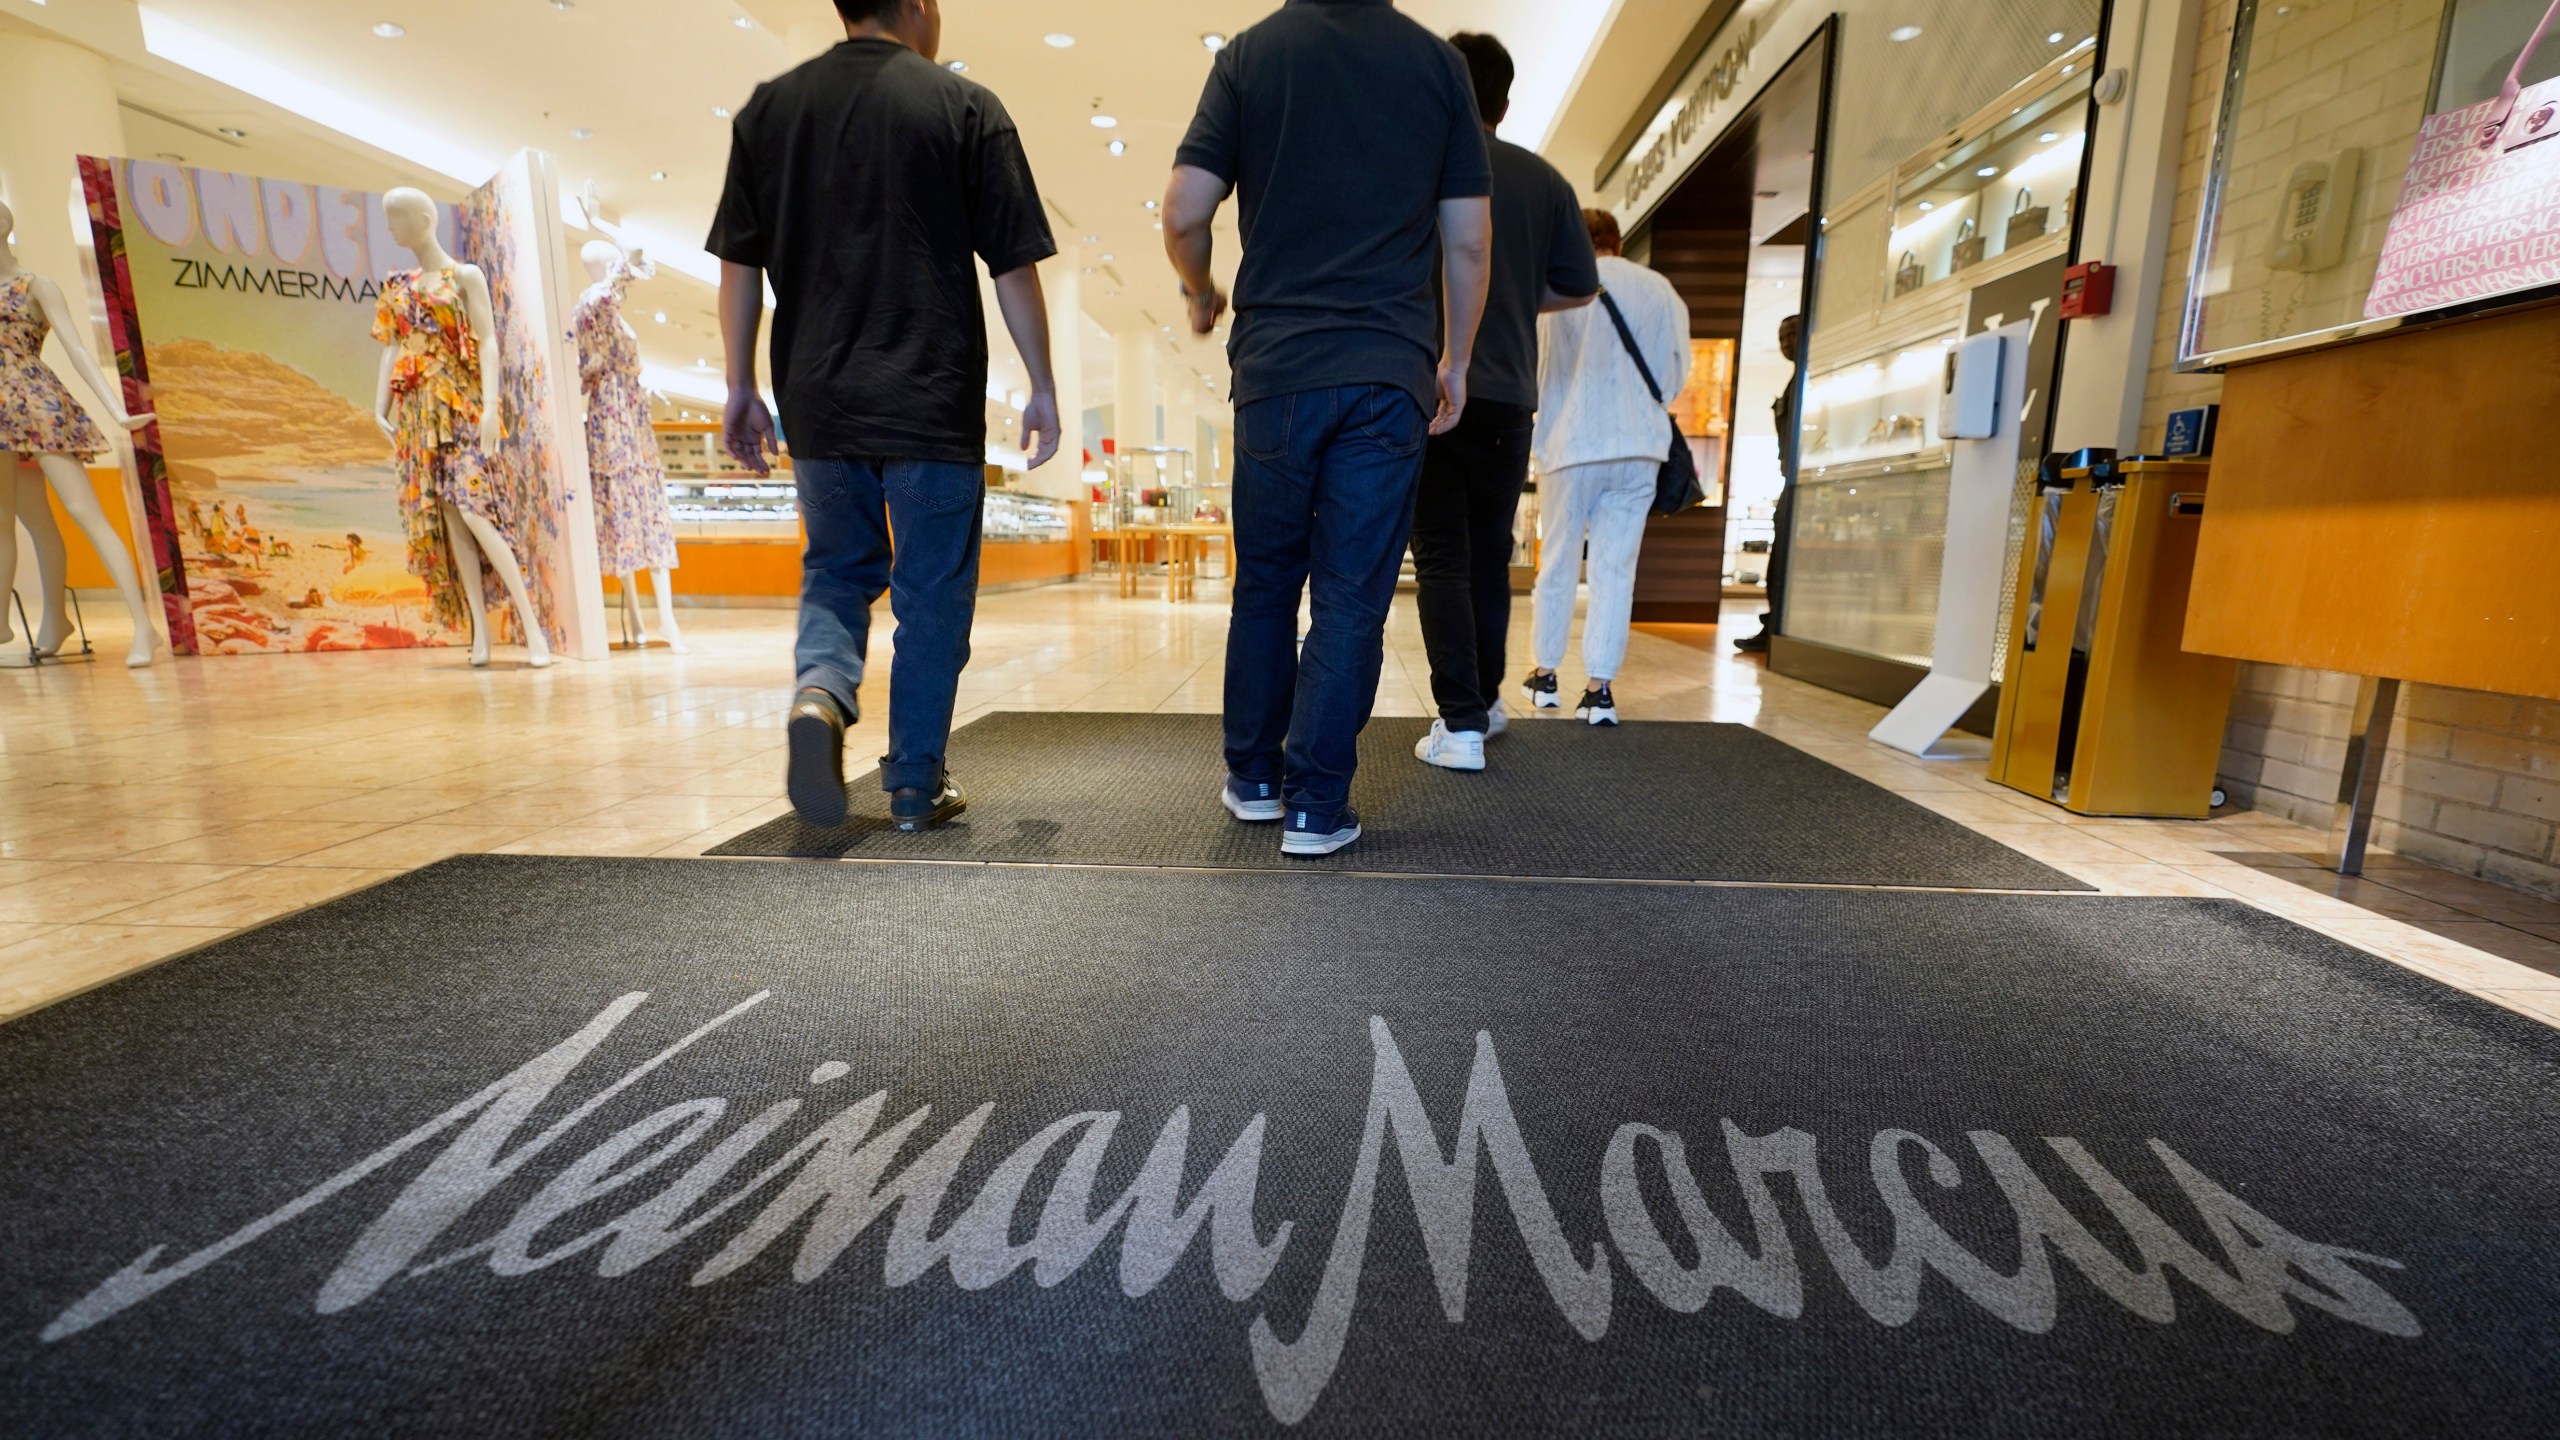 FILE - Shoppers walk into the Neiman Marcus retail department store at NorthPark shopping center in Dallas, March 30, 2023. The parent company of Saks Fifth Avenue has signed a deal to buy upscale rival Neiman Marcus for $2.65 billion. The buyout was announced Thursday, July 4, 2024, after months of rumors that the department store chains had been negotiating a deal. (AP Photo/LM Otero, File)